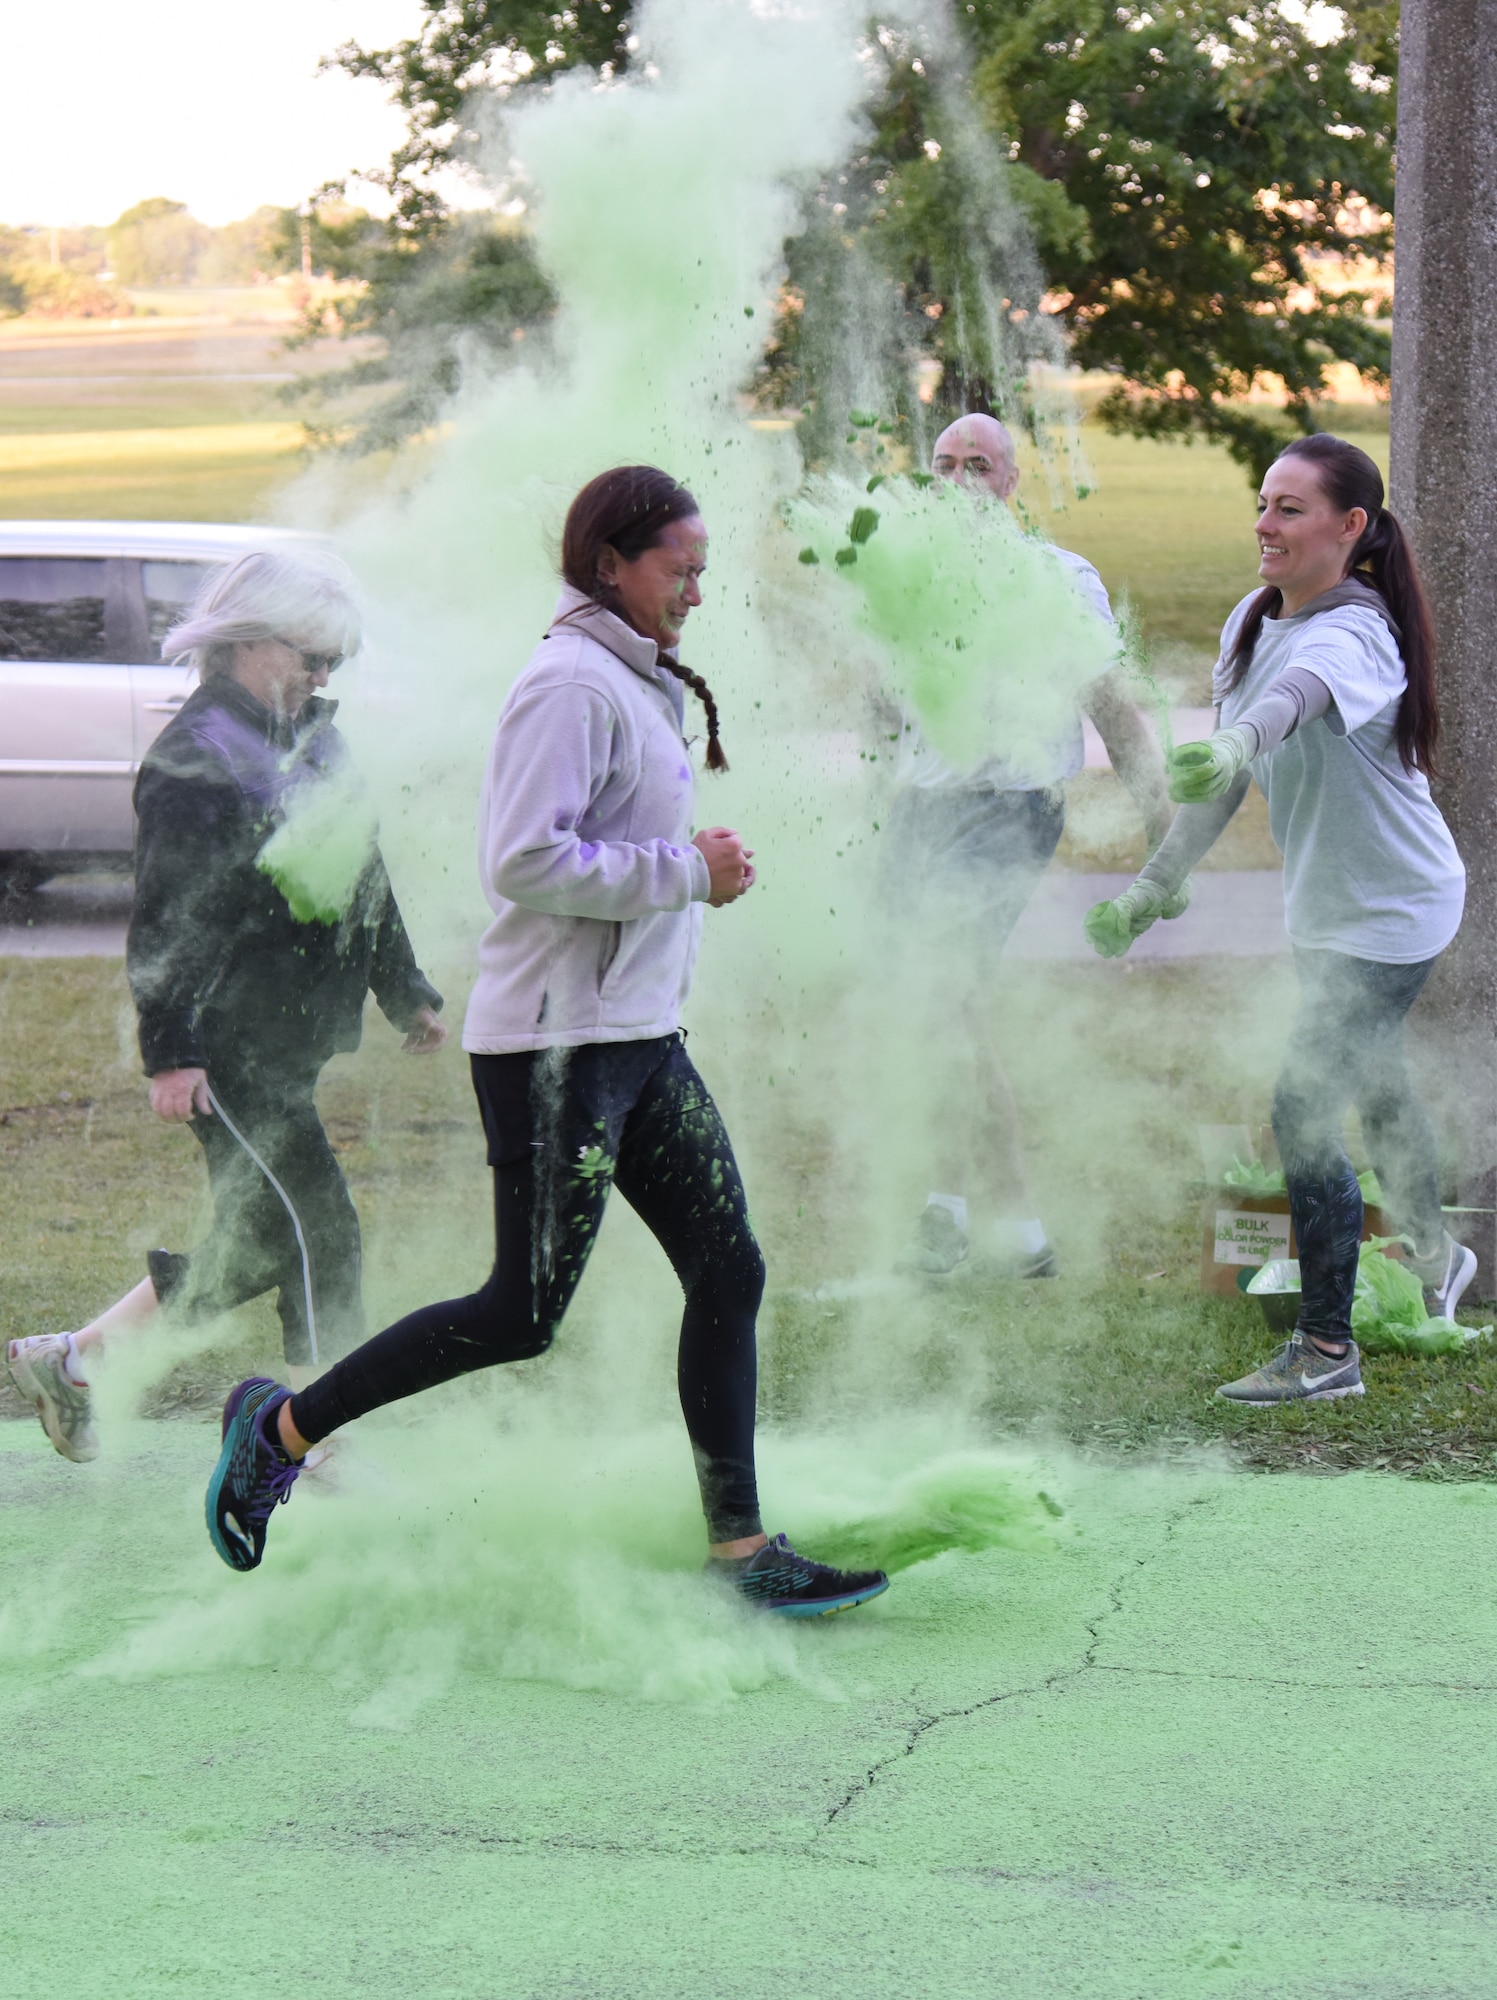 Jackie Pope, 81st Force Support Squadron Airman and Family Readiness Center chief, and U.S. Air Force Lt. Col. Melissa Rativa, 81st Logistics Readiness Squadron commander, run through green powder during the Air Force Assistance Fund Color Run at Keesler Air Force Base, Mississippi, April 20, 2018. The AFAF raises funds for charitable affiliates that provide support to Air Force family in need. (U.S. Air Force photo by Kemberly Groue)